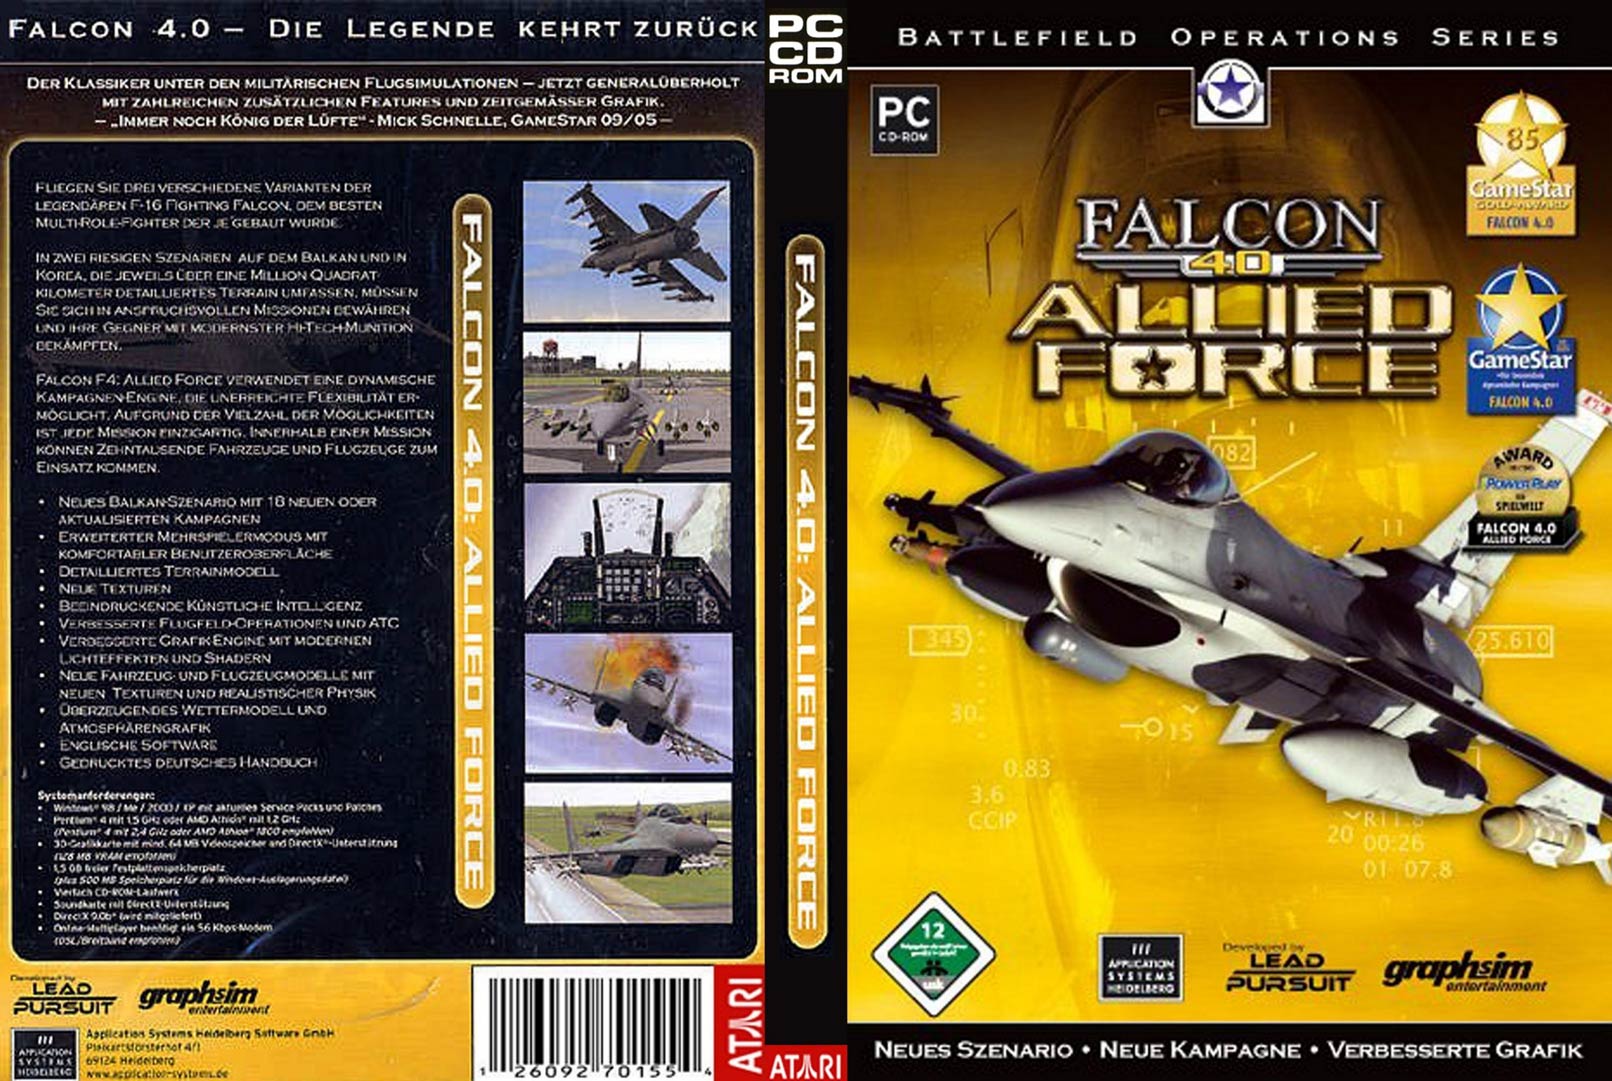 Falcon 4.0: Allied Force - DVD obal